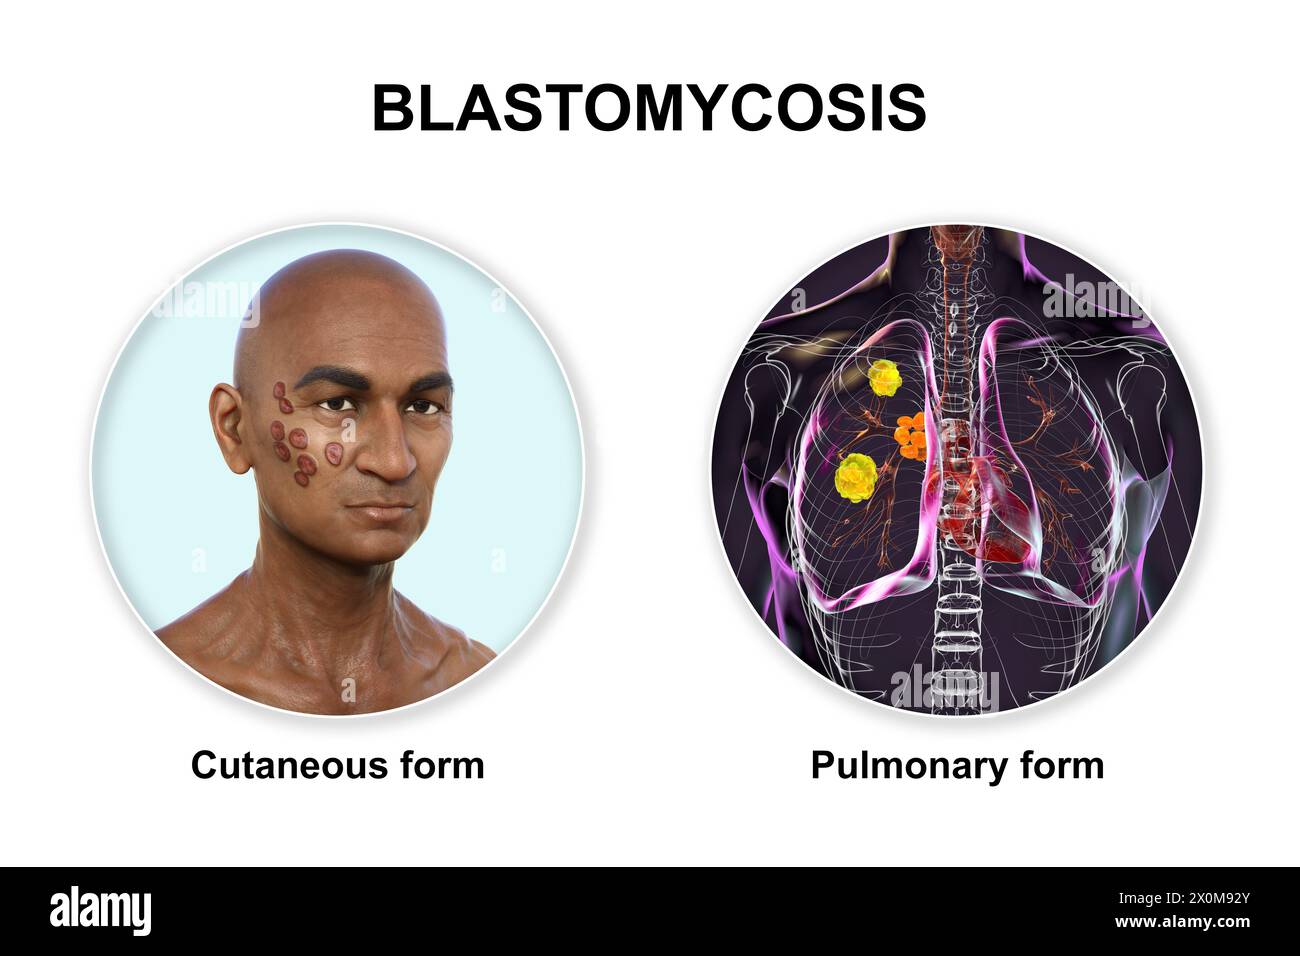 3D illustration showing two clinical presentations of blastomycosis: cutaneous (affecting the skin) and pulmonary (affecting the lungs). Blastomycosis is a fungal infection that can occur after inhaling Blastomyces dermatitidis spores. It is often asymptomatic, but where symptoms develop they primarily affect the lungs, with some patients also developing skin lesions. Stock Photo